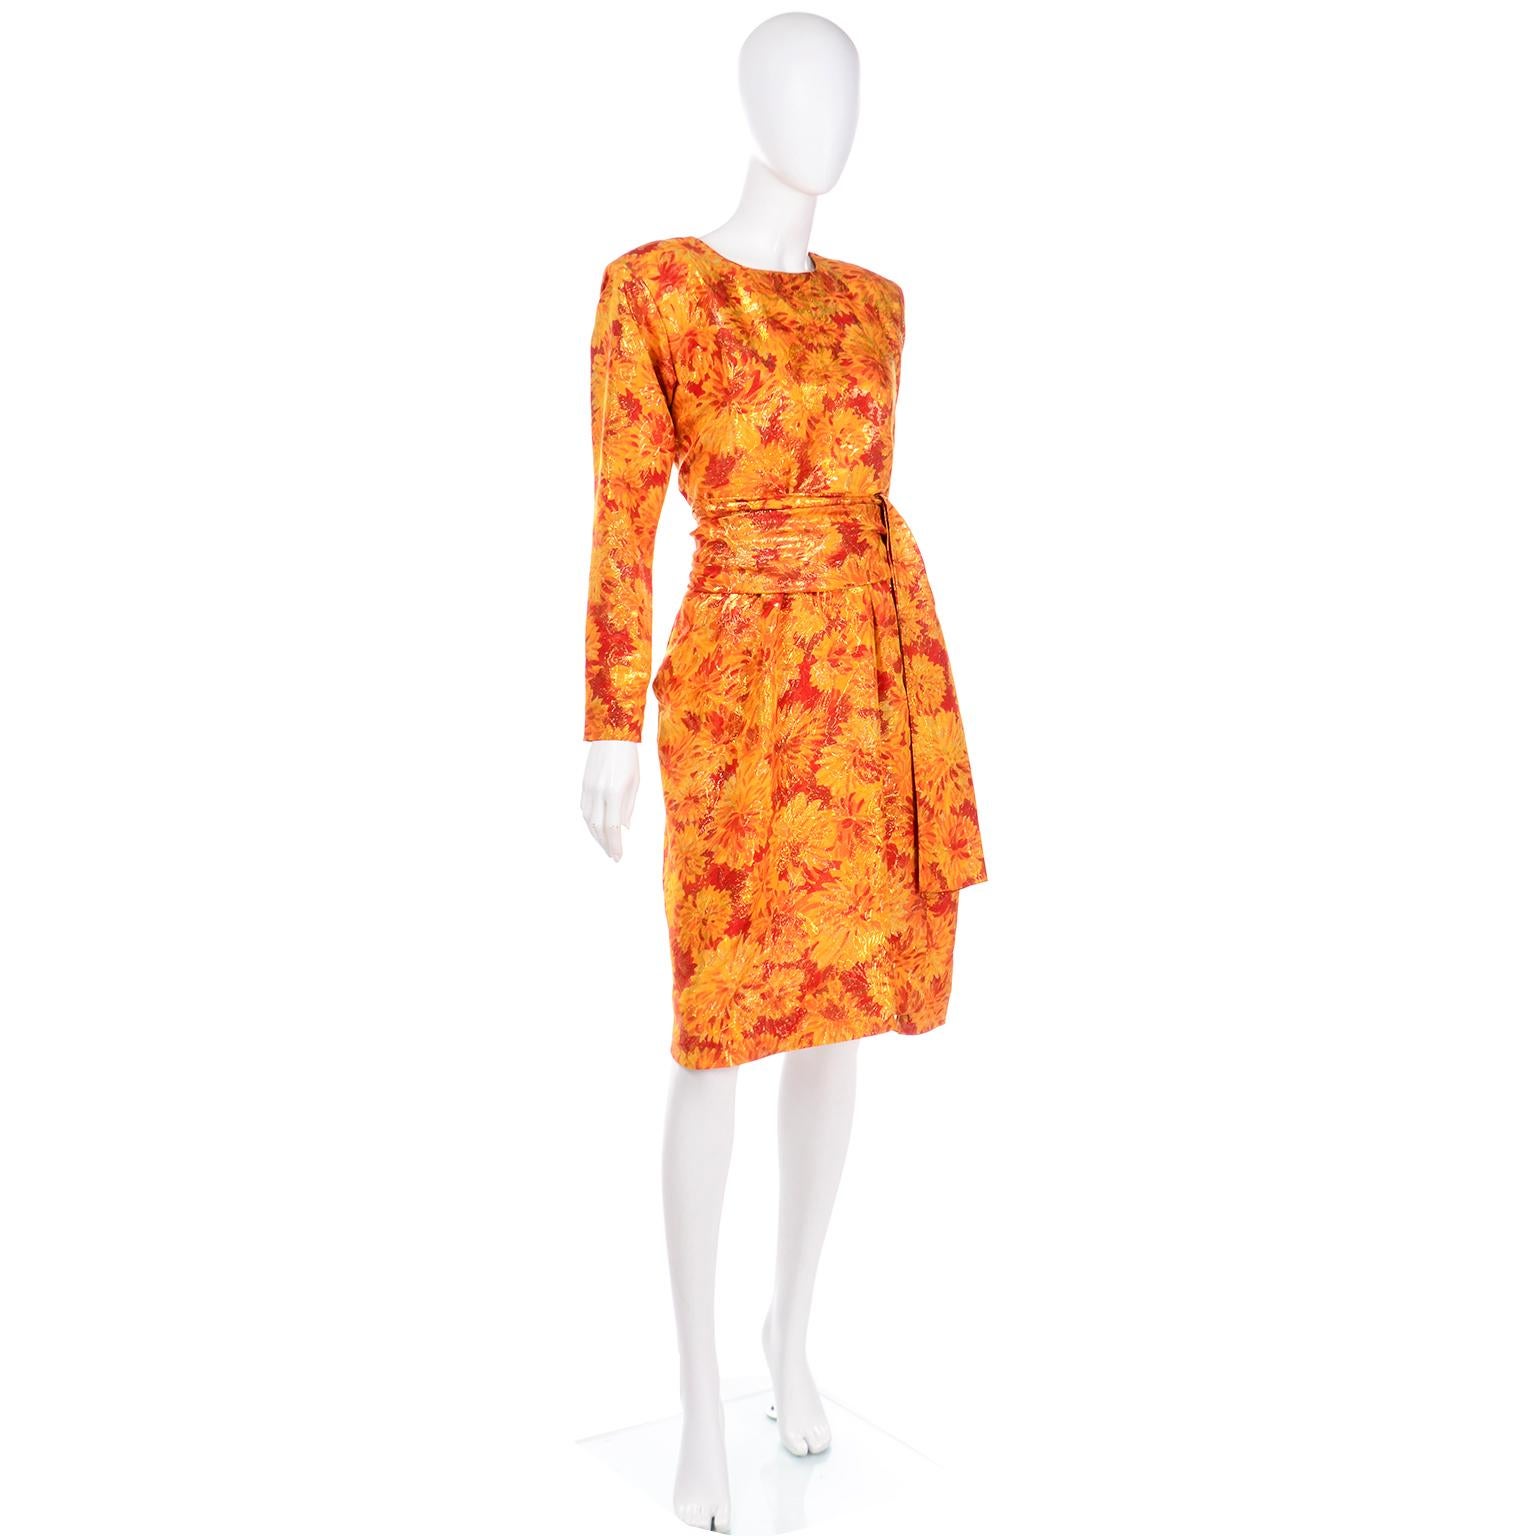 Deadstock YSL 1989 Orange Metallic Documented Yves Saint Laurent Runway Dress In Excellent Condition For Sale In Portland, OR